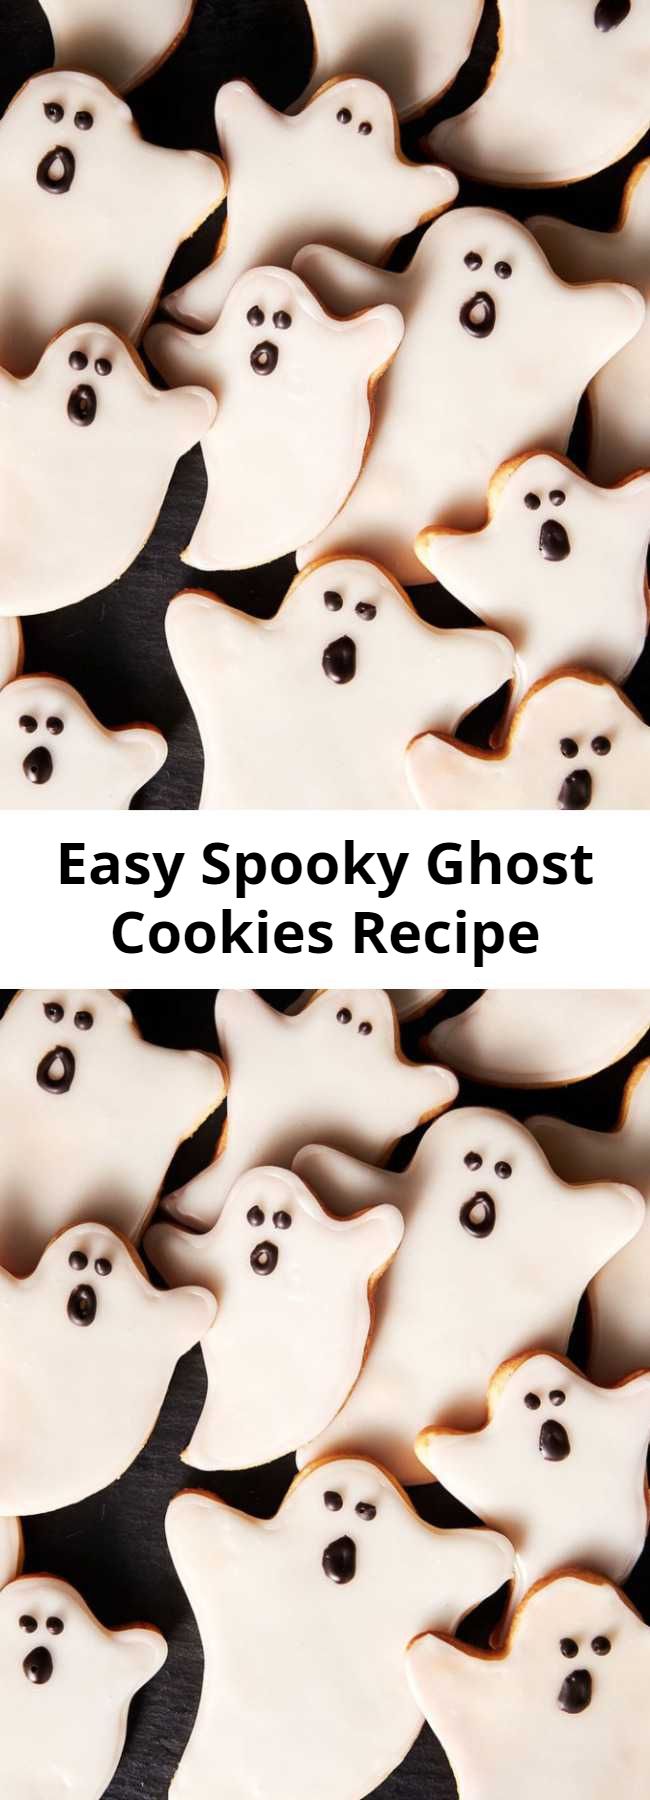 Easy Spooky Ghost Cookies Recipe - The best way to never be afraid of ghosts? Turn them into cute little sugar cookies. These spooky ghosts will be a hit at every halloween party and are far easier to make then they look! Here's our best tips and tricks we have for decorating sugar cookies.  